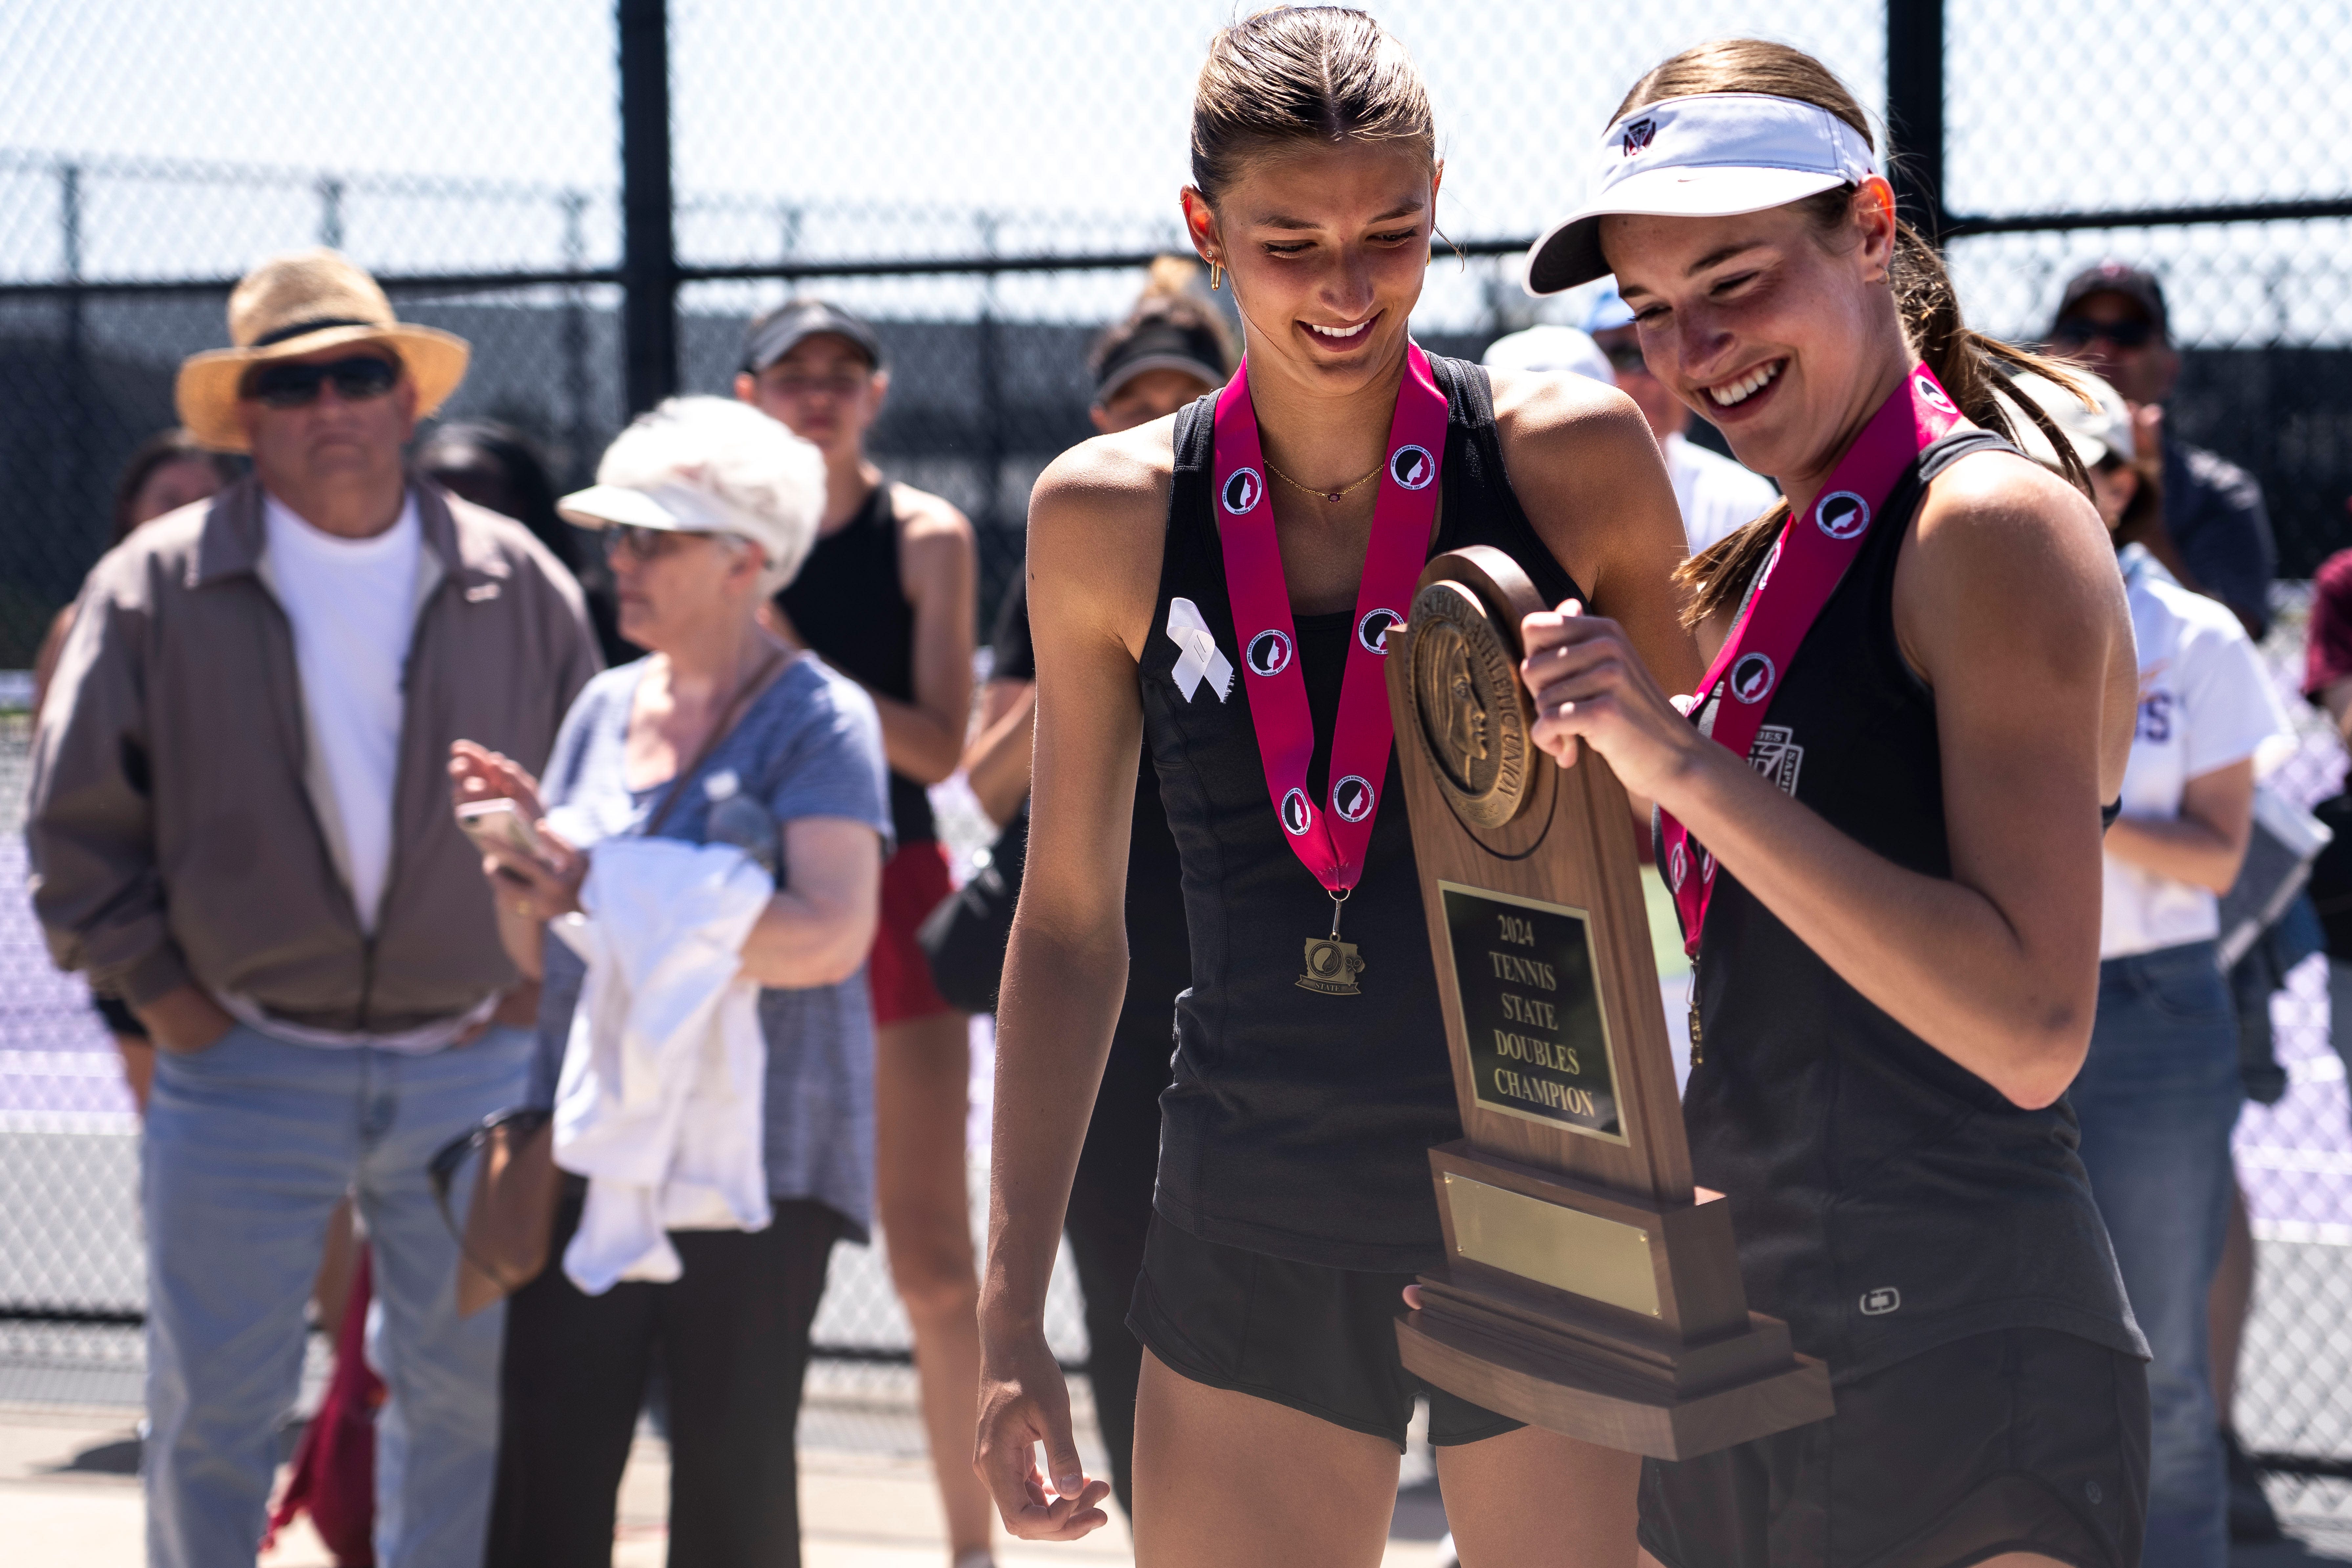 Dowling Catholic's Frye, Mauro win Class 2A state tennis doubles championship